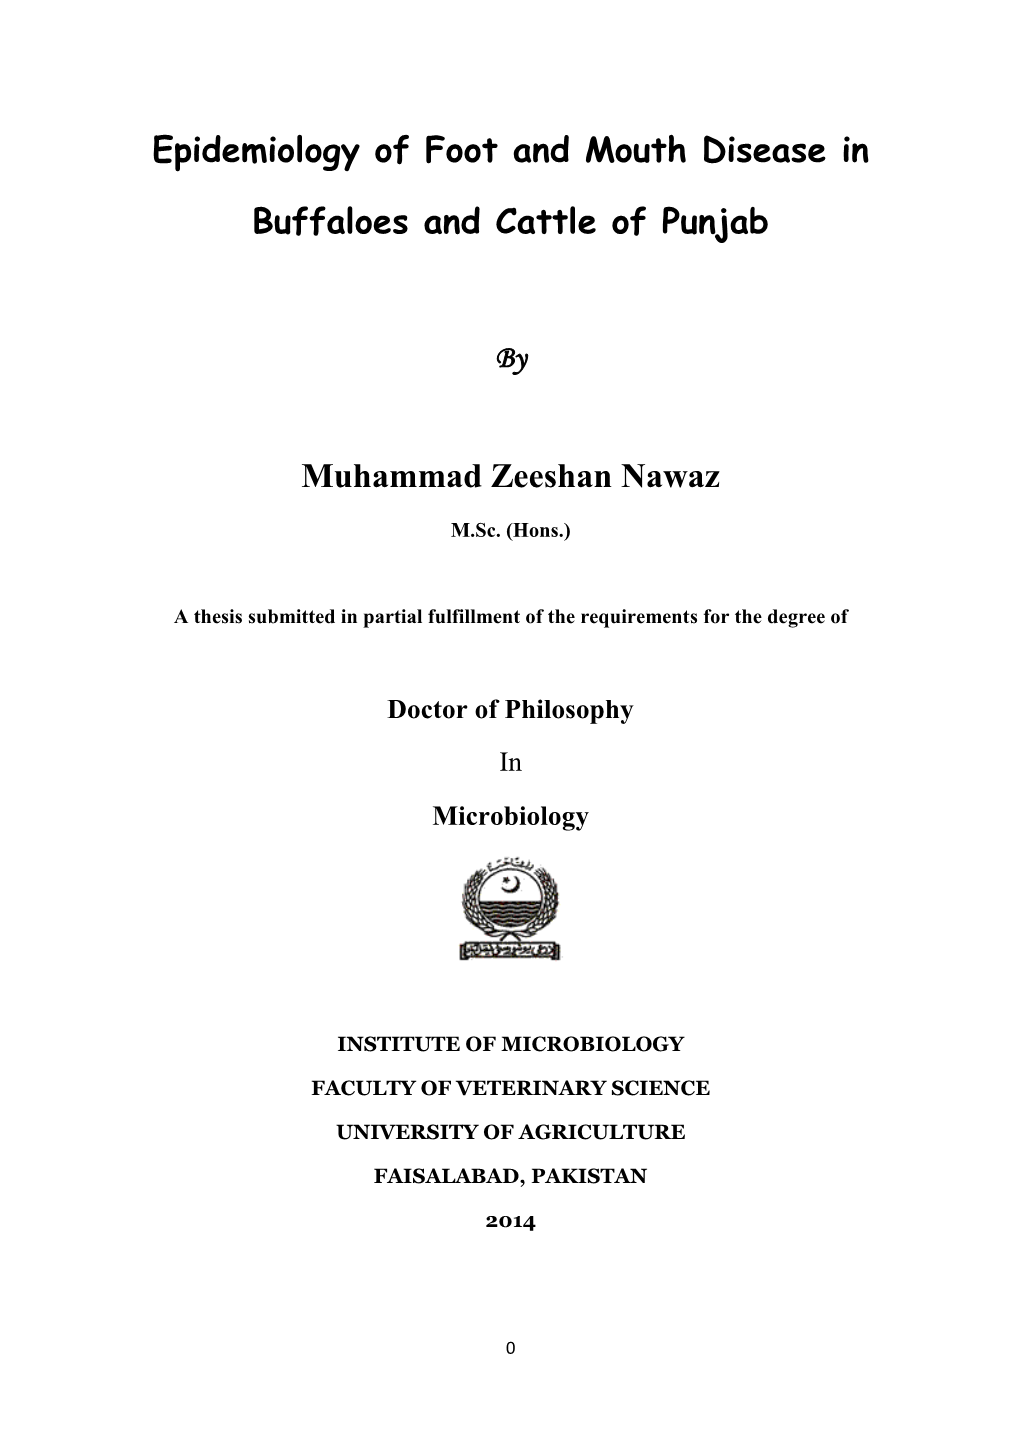 Epidemiology of Foot and Mouth Disease in Buffaloes and Cattle Of